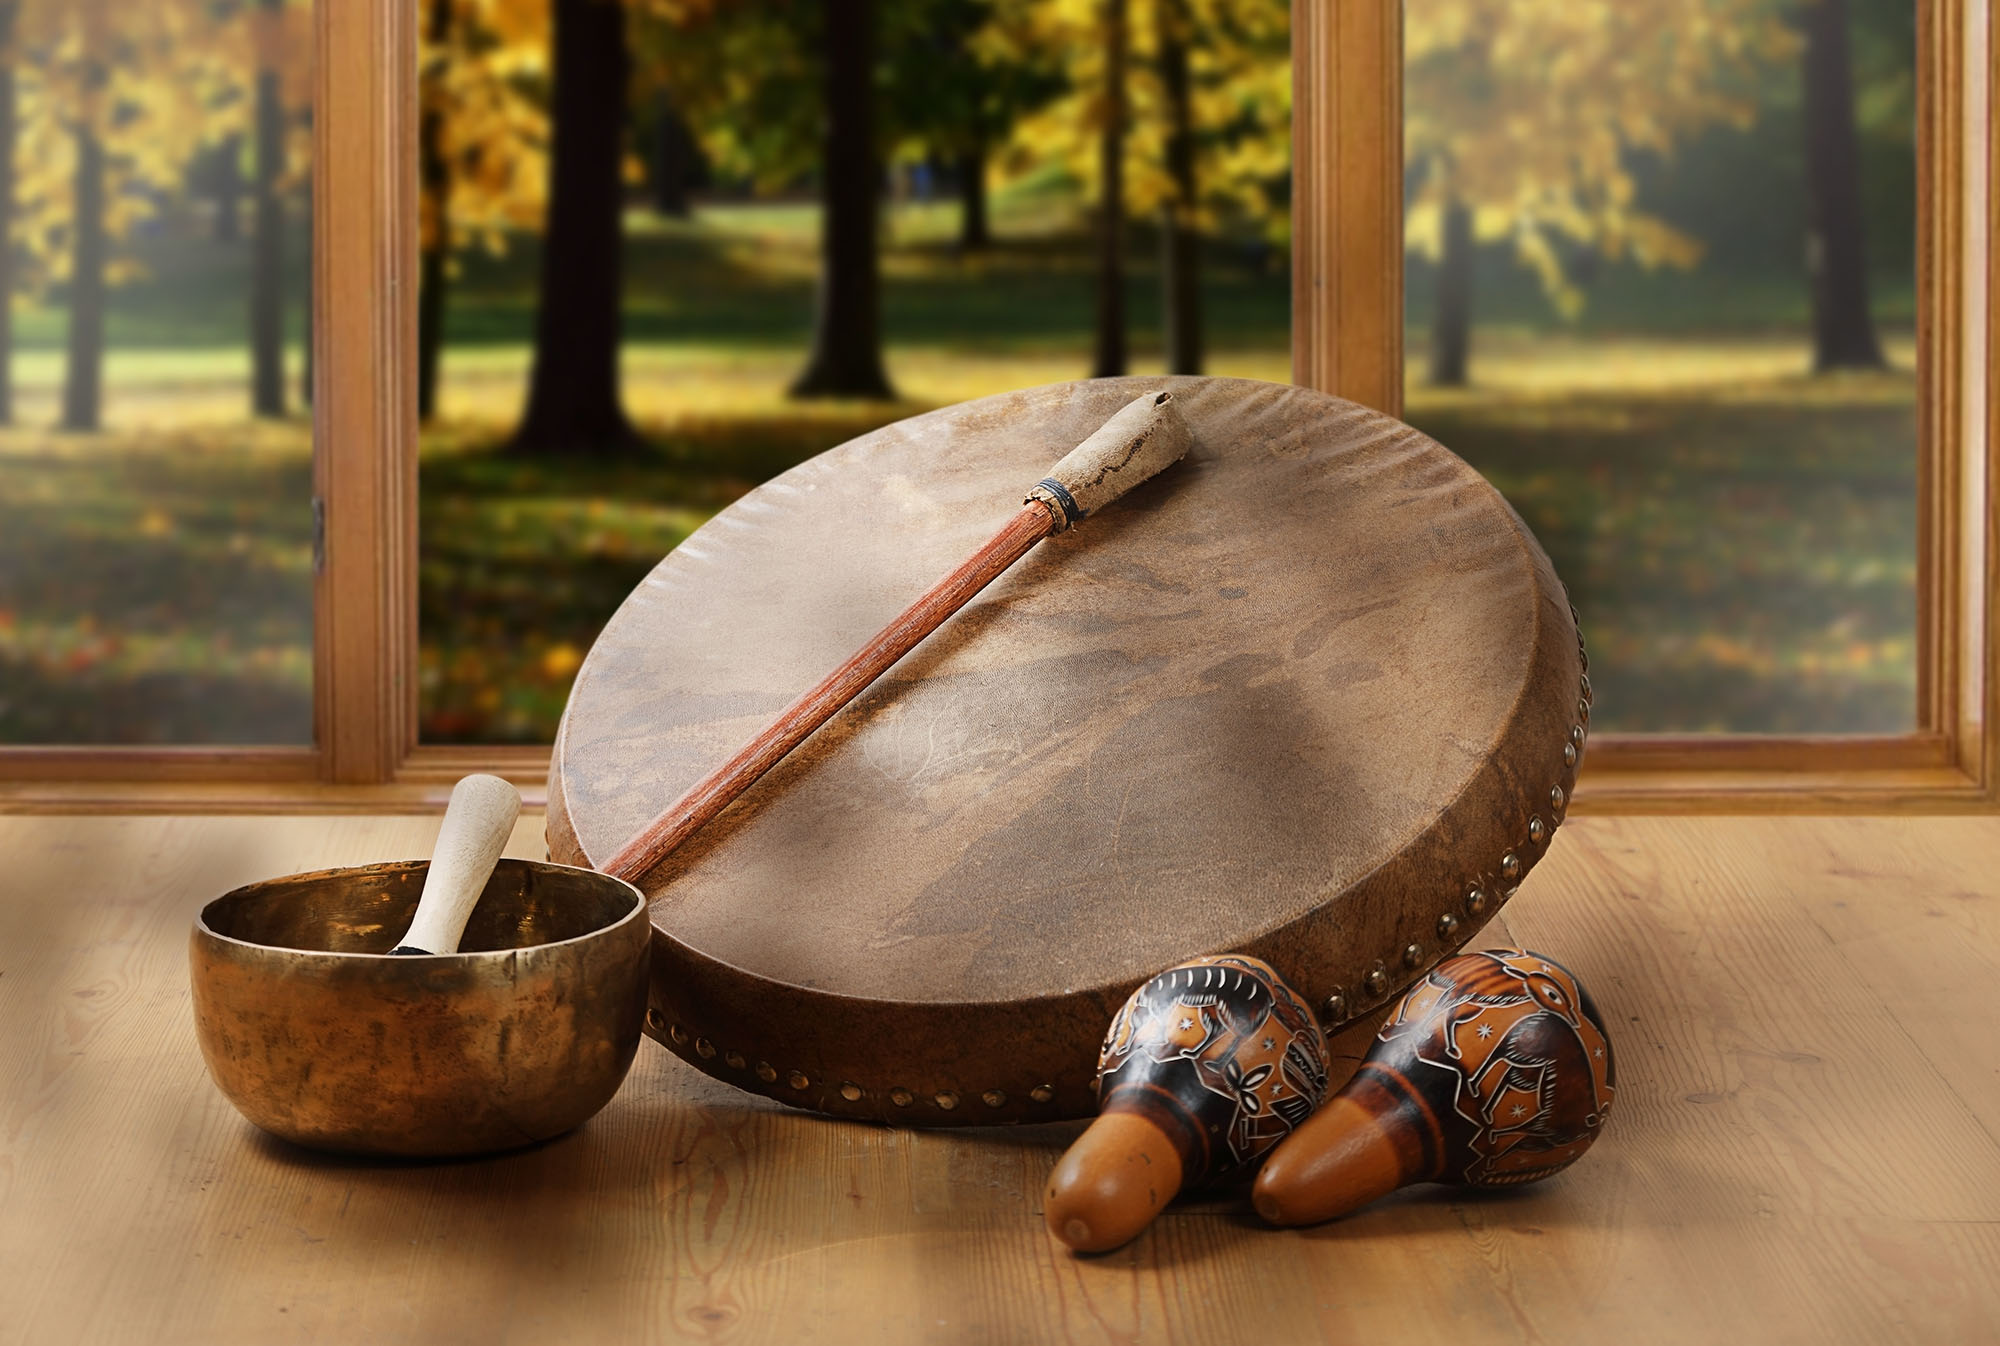 A still life of the shamanic drum, Tibetan singing bowls and mar